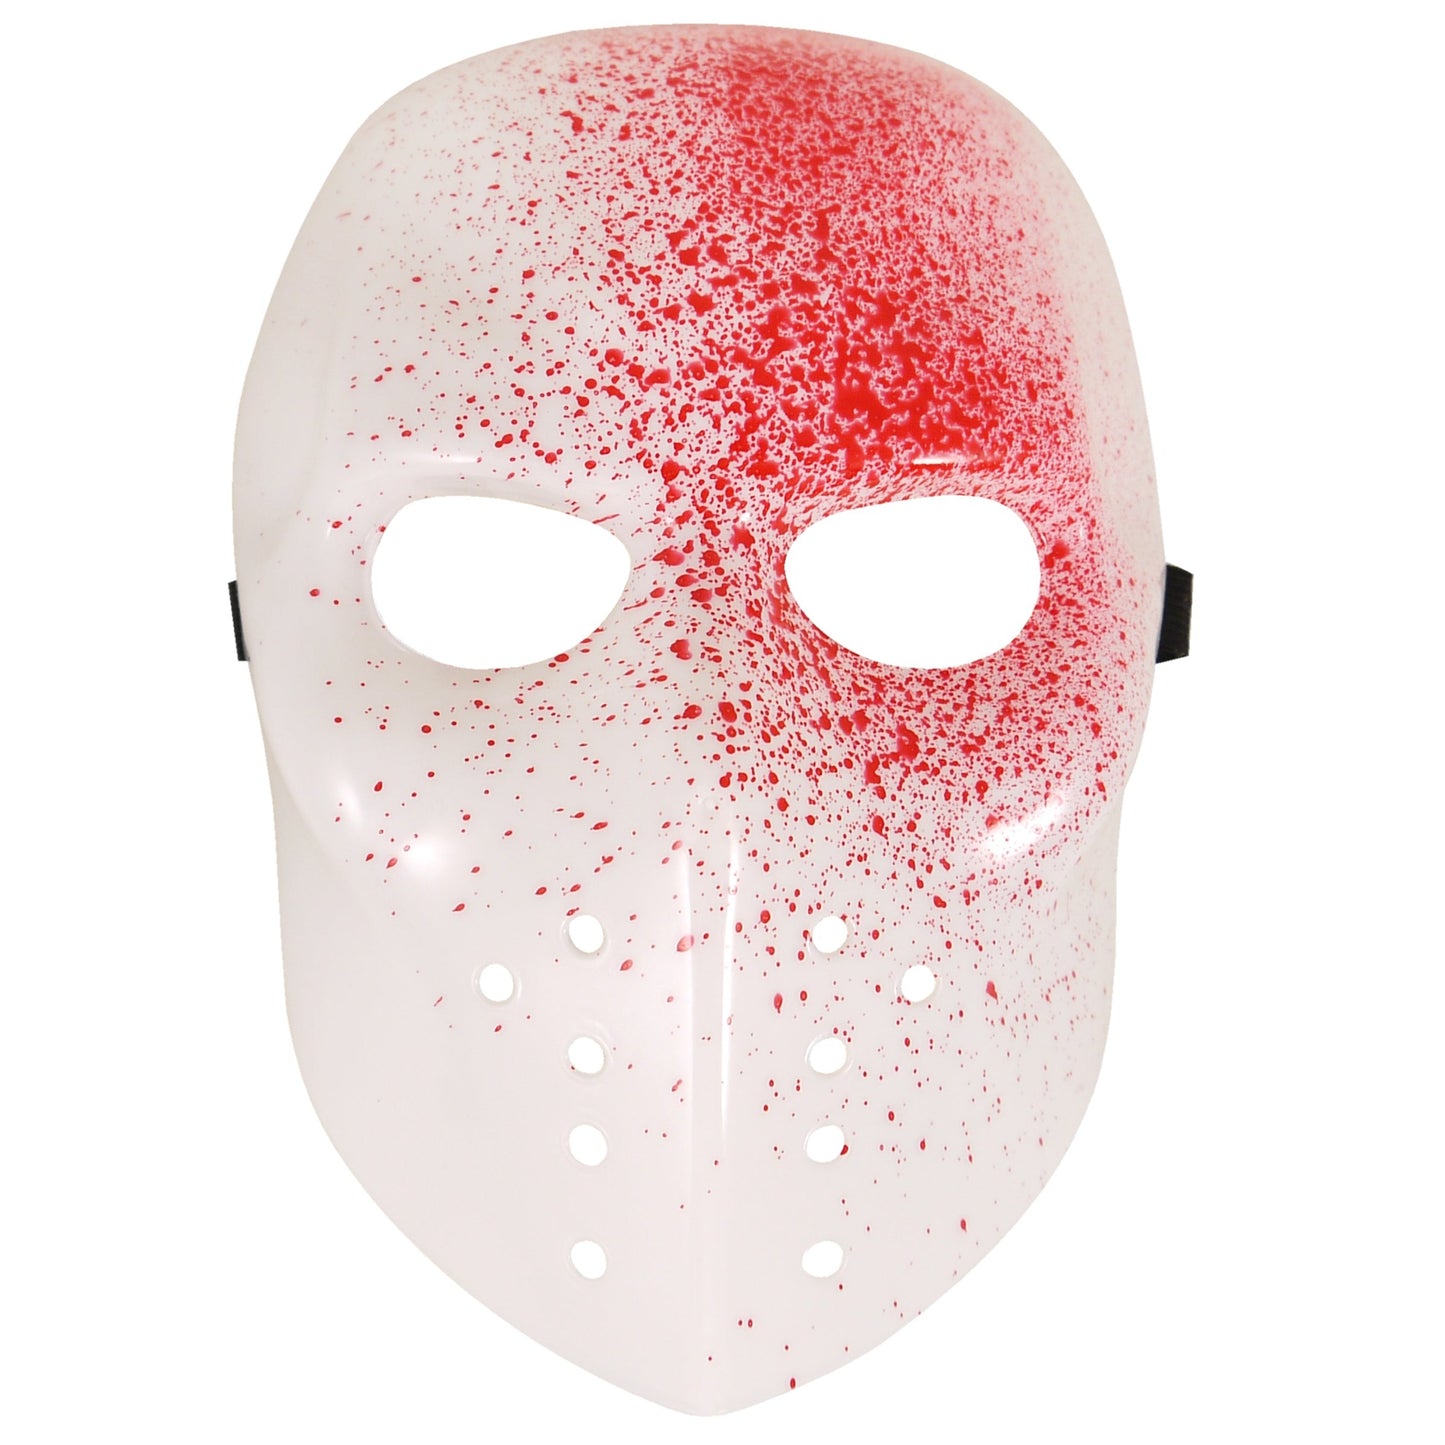 Bloodied Hockey Horror Mask